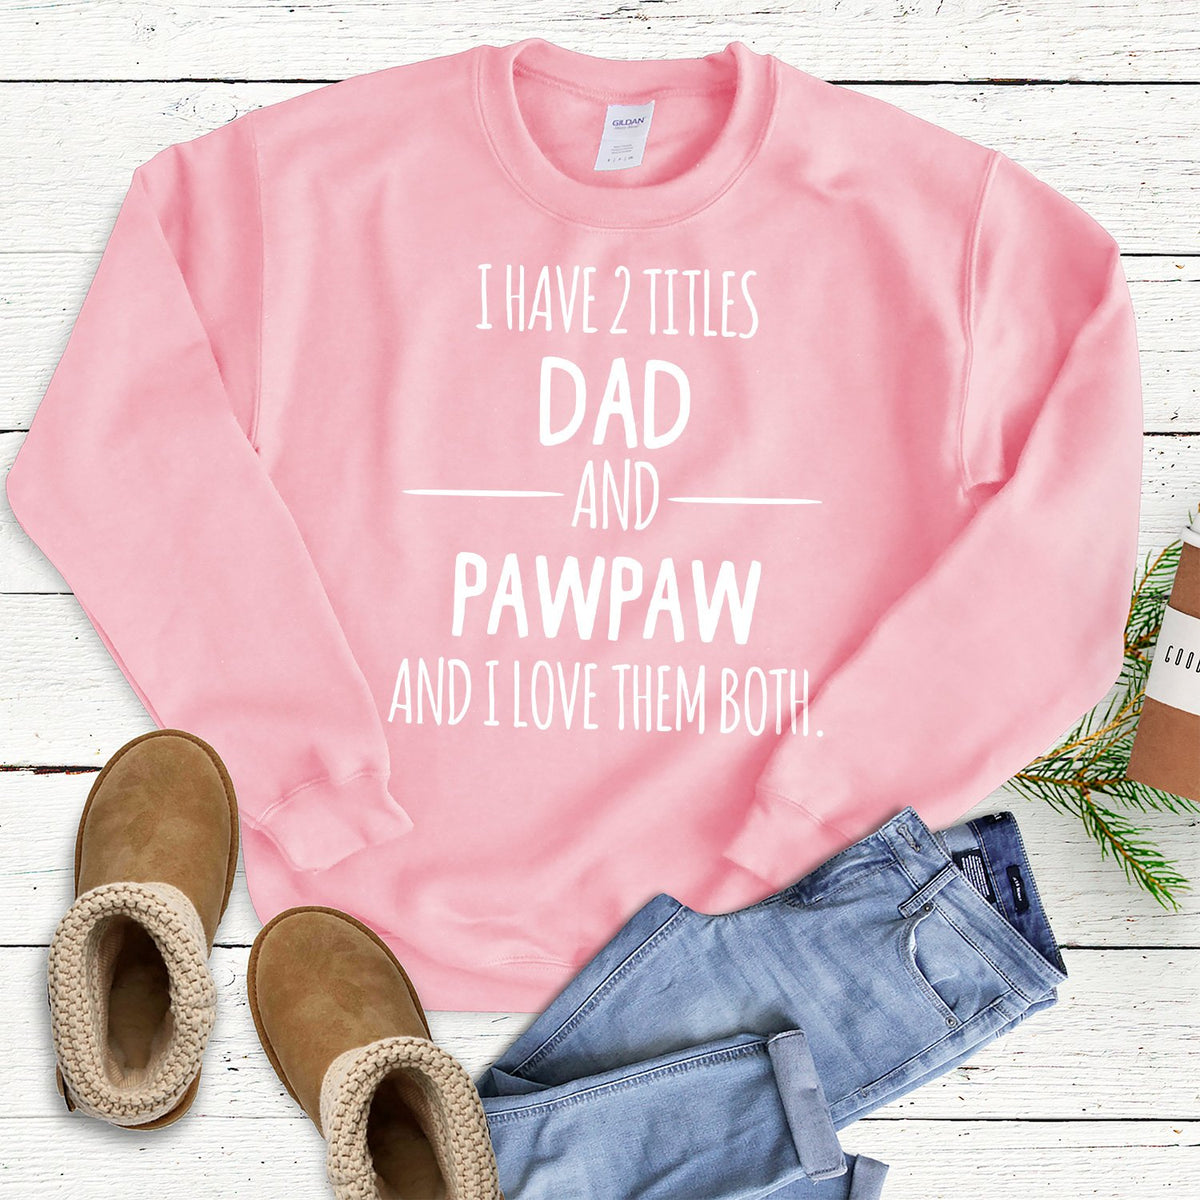 I Have 2 Titles Dad and PawPaw and I Love Them Both - Long Sleeve Heavy Crewneck Sweatshirt